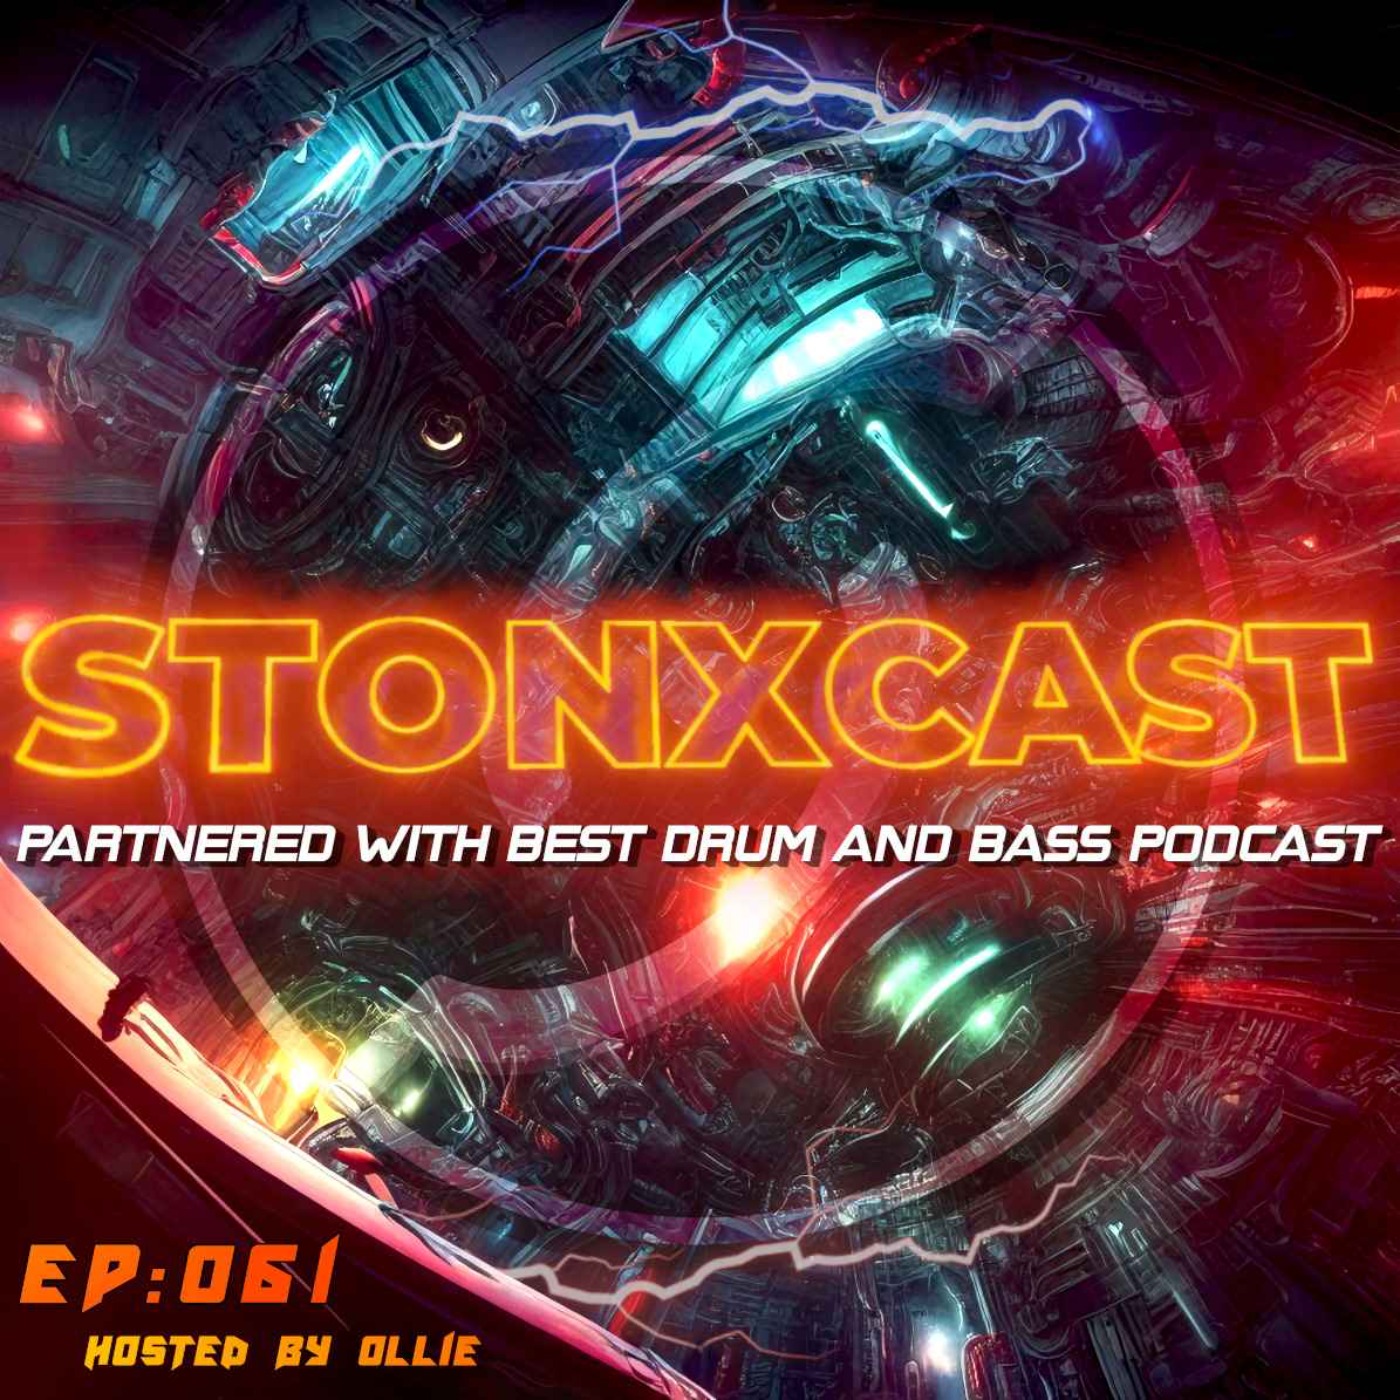 Stonxcast EP:061 - Hosted by Ollie Artwork